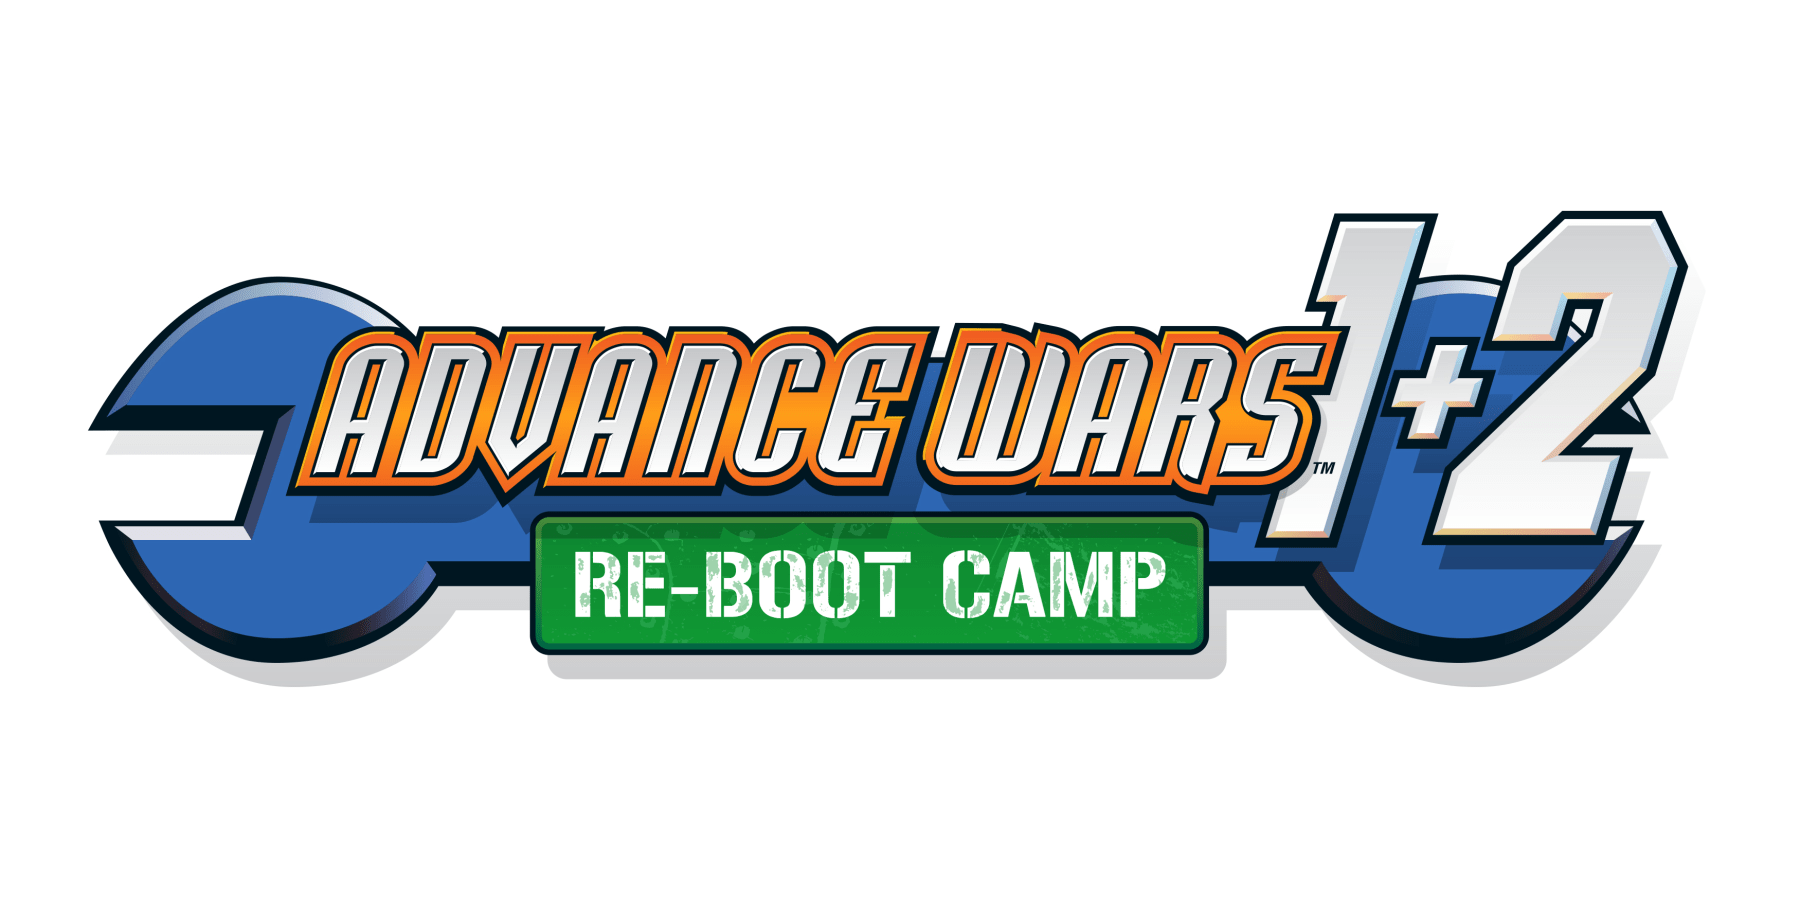 Rumors Switch Wars Impressions and Highlights, and News, Report Scores, for Camp Bleacher | Advance Videos | Review: Stats, Re-Boot 1+2 Gameplay